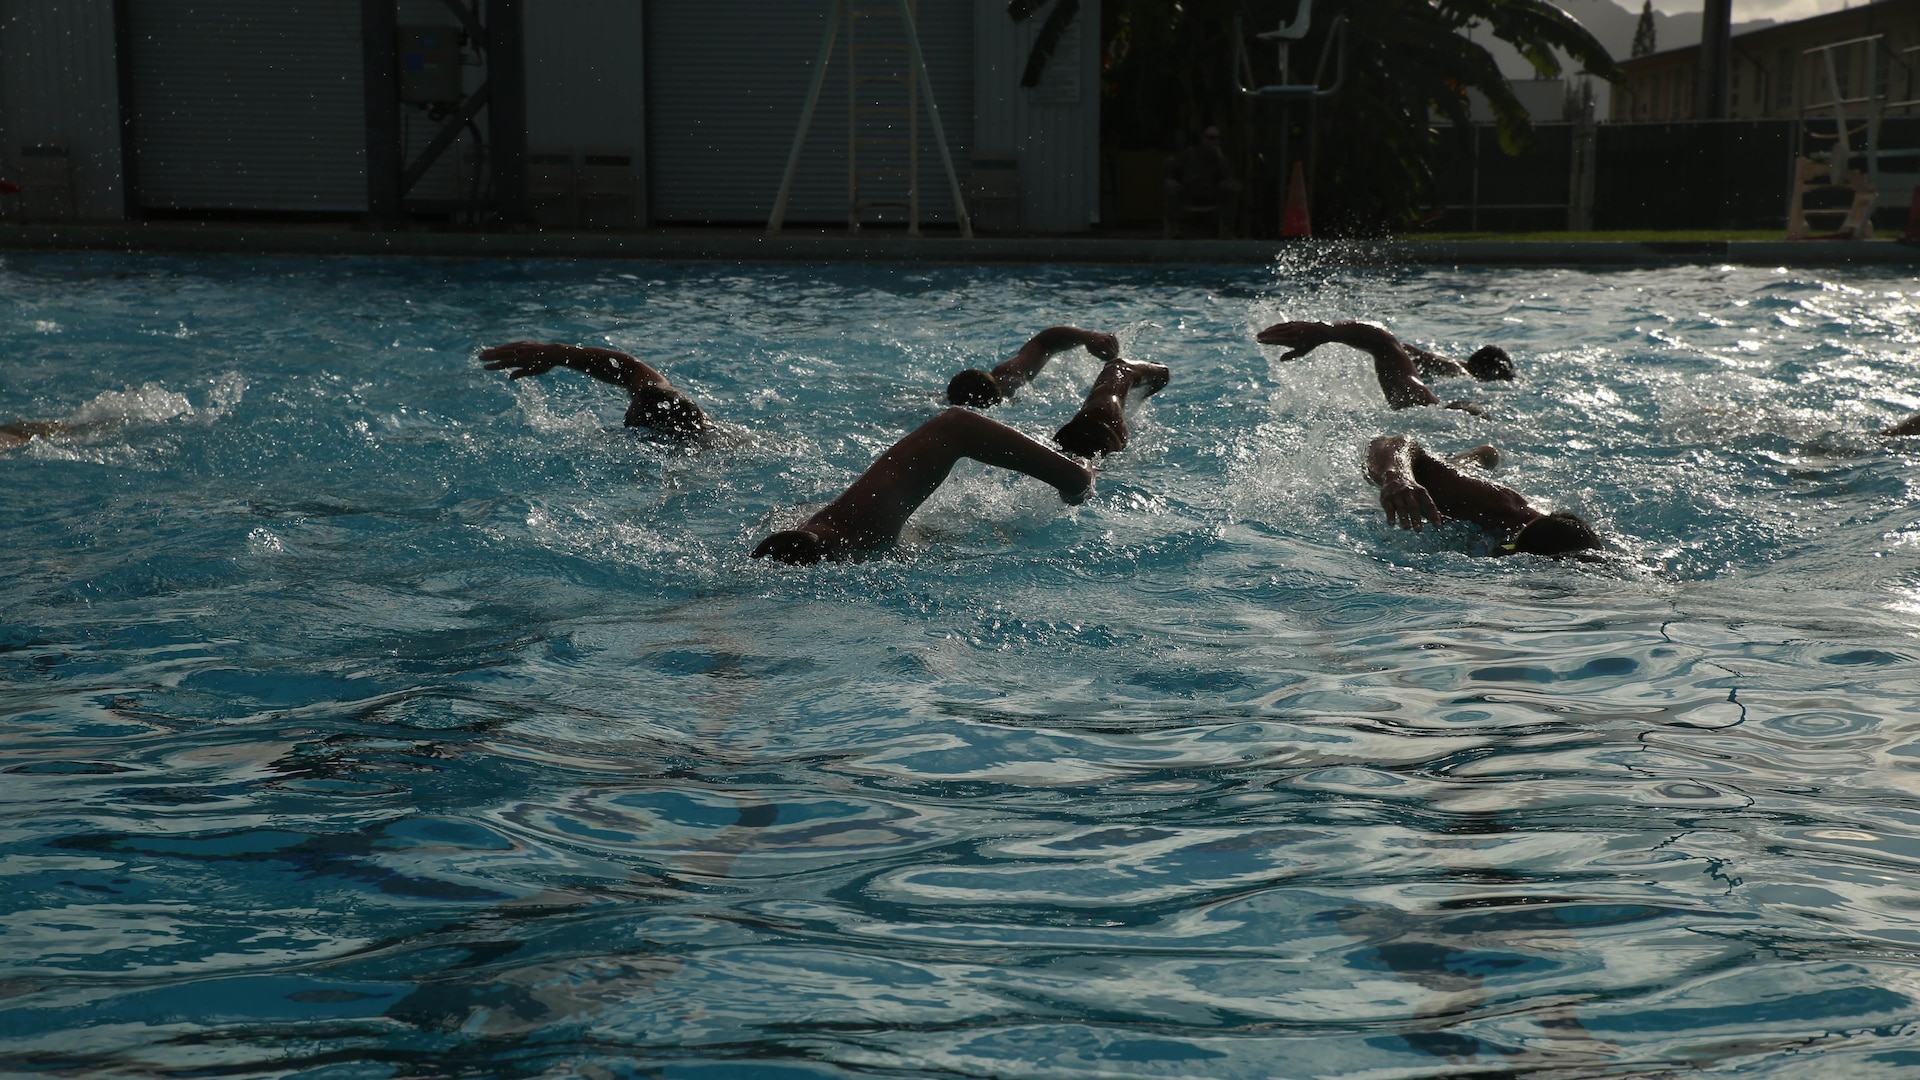 Students in the Marine Corps Instructor Course of Water Survival swim across the pool as they conduct water physical training at the base pool aboard Marine Corps Base Hawaii, Dec. 1, 2015. MCICWS is a course for noncommissioned officers and higher to become water survival instructors, whose purpose is to make sure Marines are safe during basic swim qualification. “It’s a very physically demanding course but it’s at a level where it needs to be,” said Gunnery Sgt. Brandon Soetaert, the chief instructor trainer for the MCICWS with Expeditionary Warfare Training Group, Pacific and a Kansas City, Mo., native. “It’s going to weed out some of the weak individuals.” 